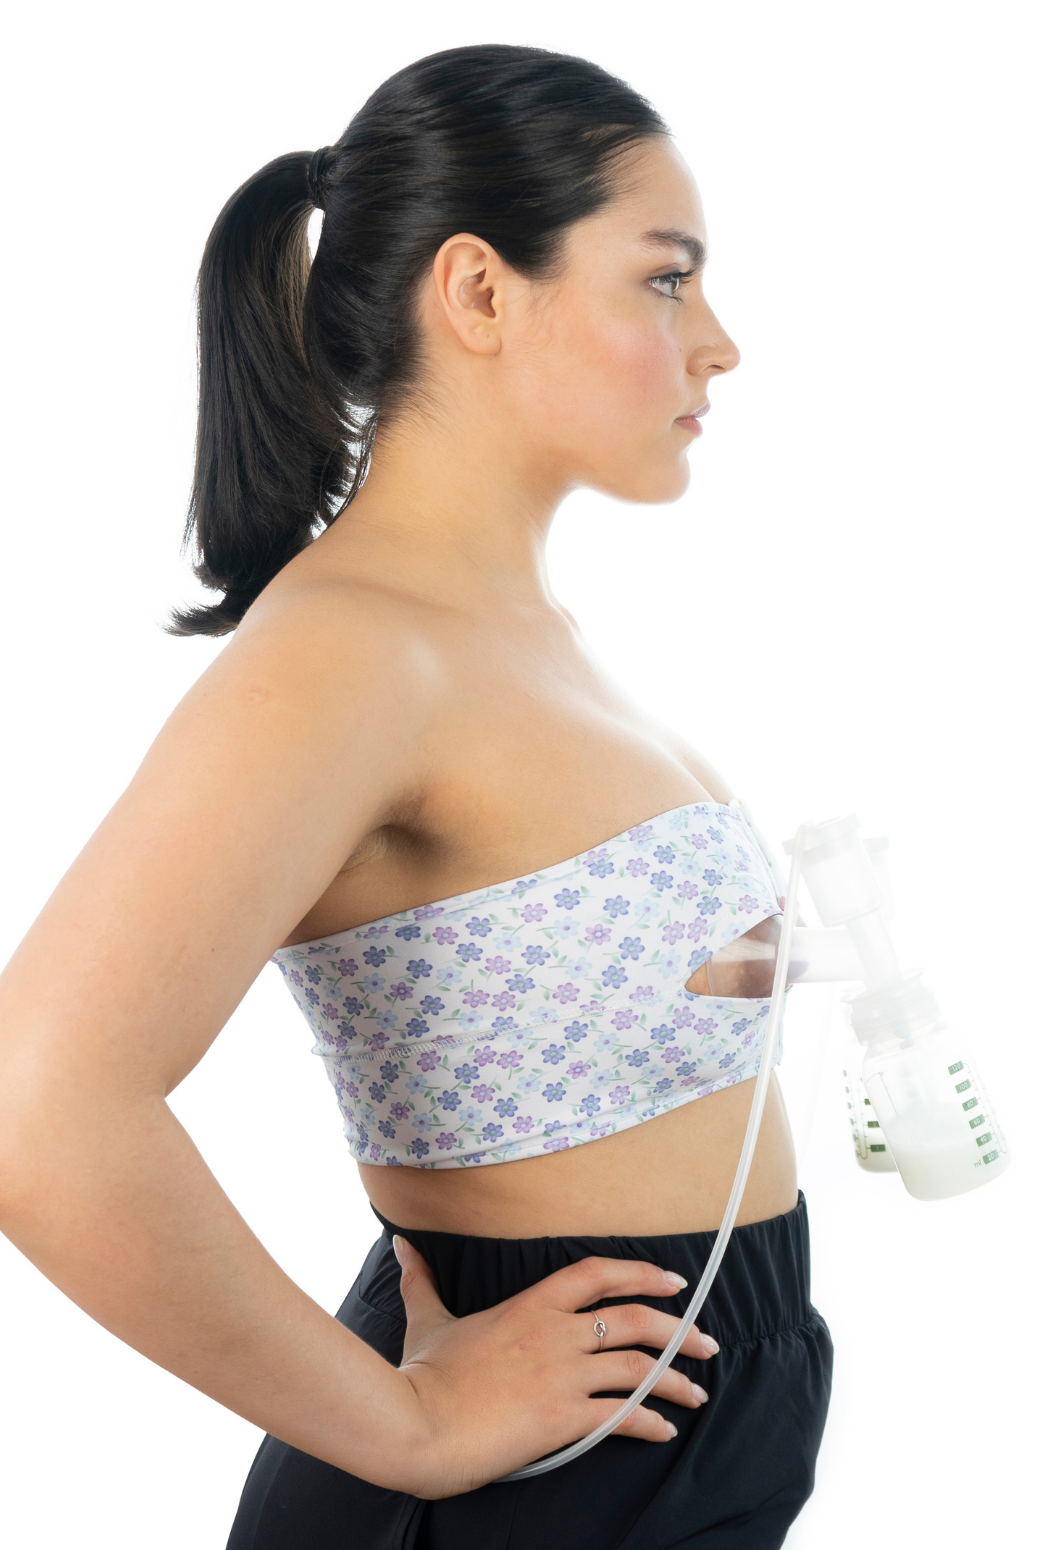 Pump Ease Hands, Free Breast Pumping Support Band